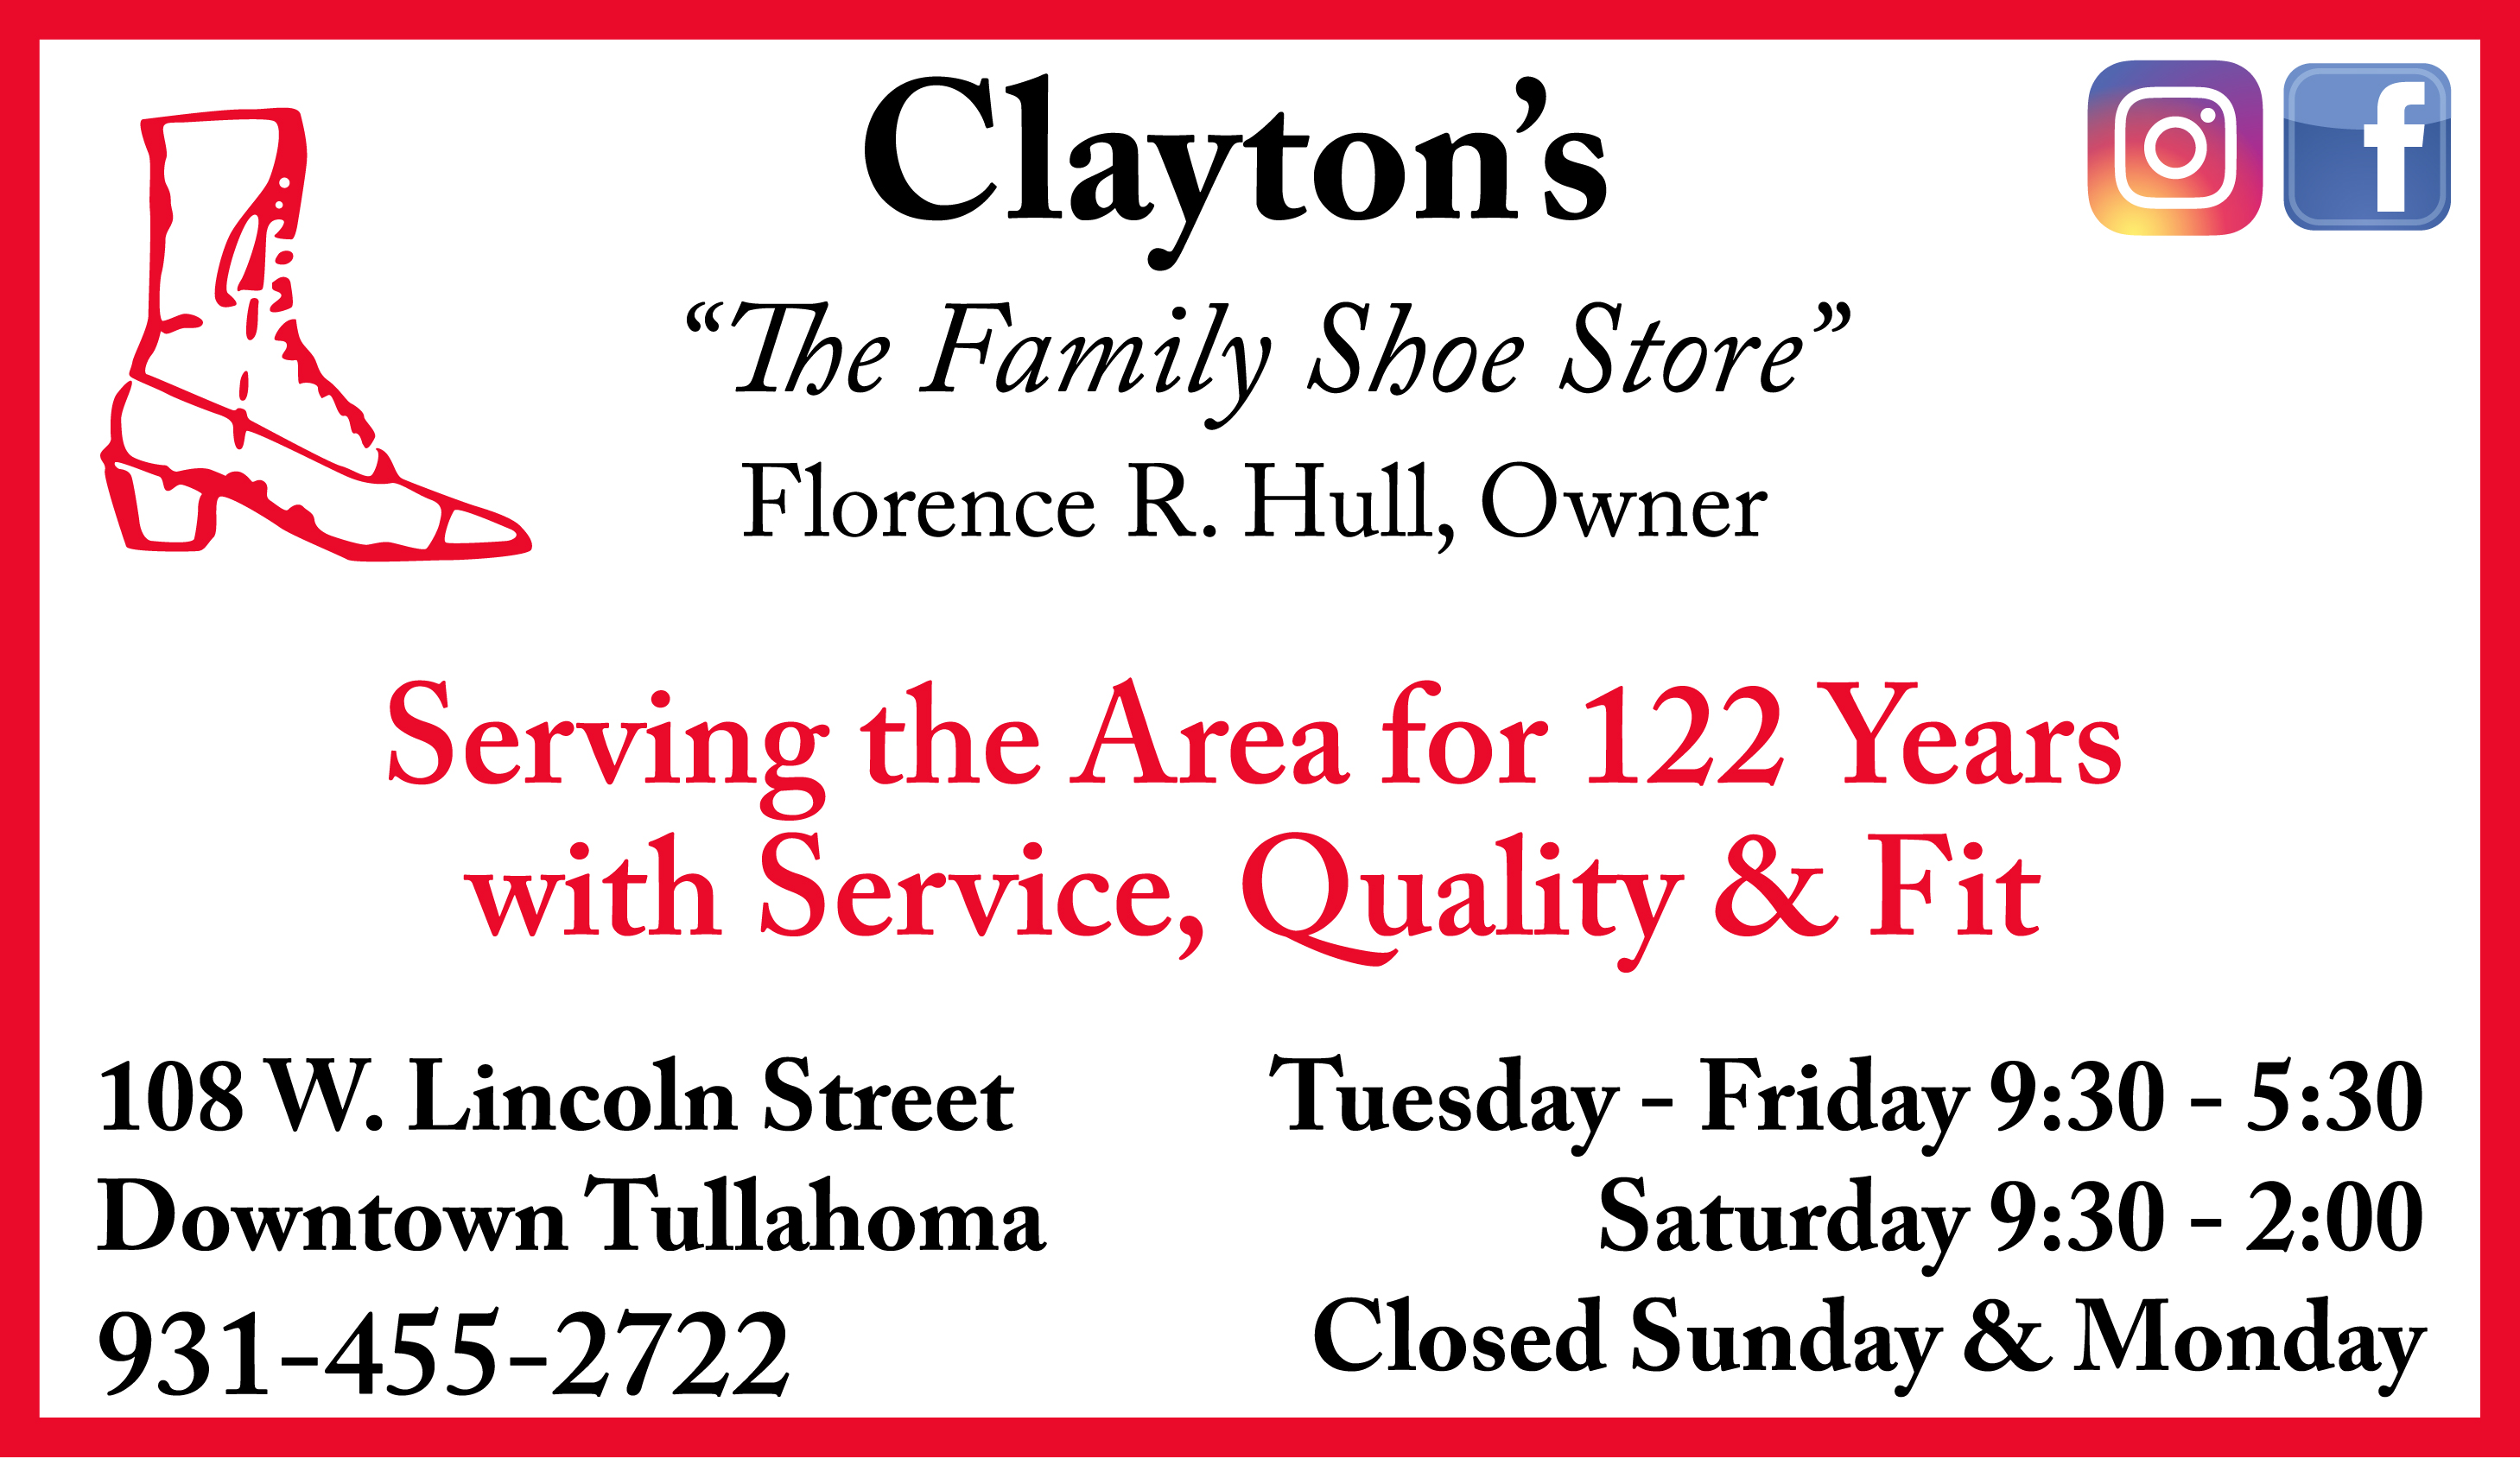 Clayton's Shoes ad